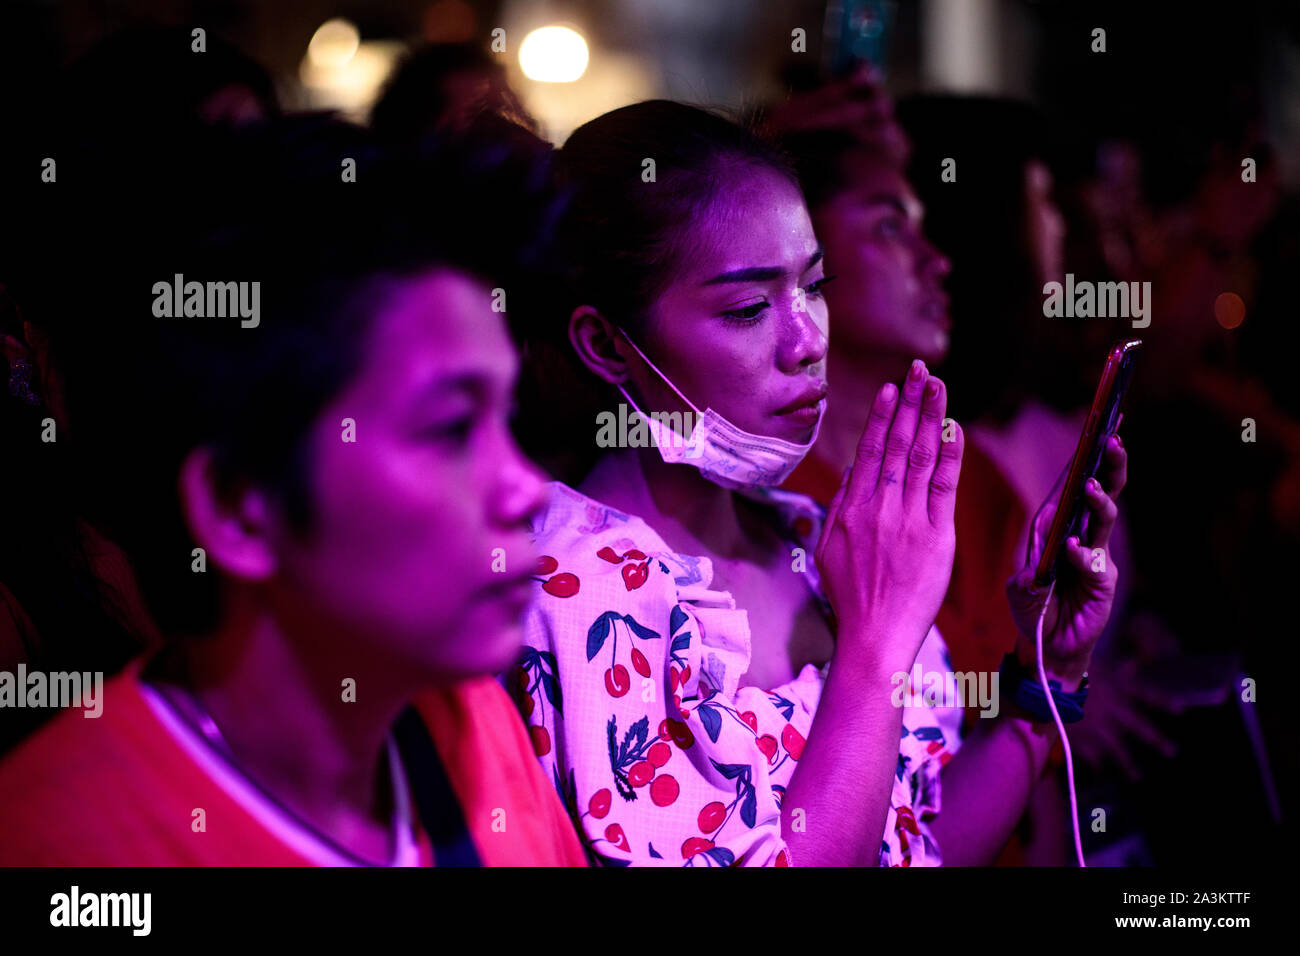 Hindu devotees take part in Navratri celebrations by the Sri Mariamman Temple on October 8, 2019 in Bangkok, Thailand. The widely observed Hindu festival of Navratri celebrates the victory of one of a number of gods, depending on the region, over evil and takes place over nine holy nights. Stock Photo